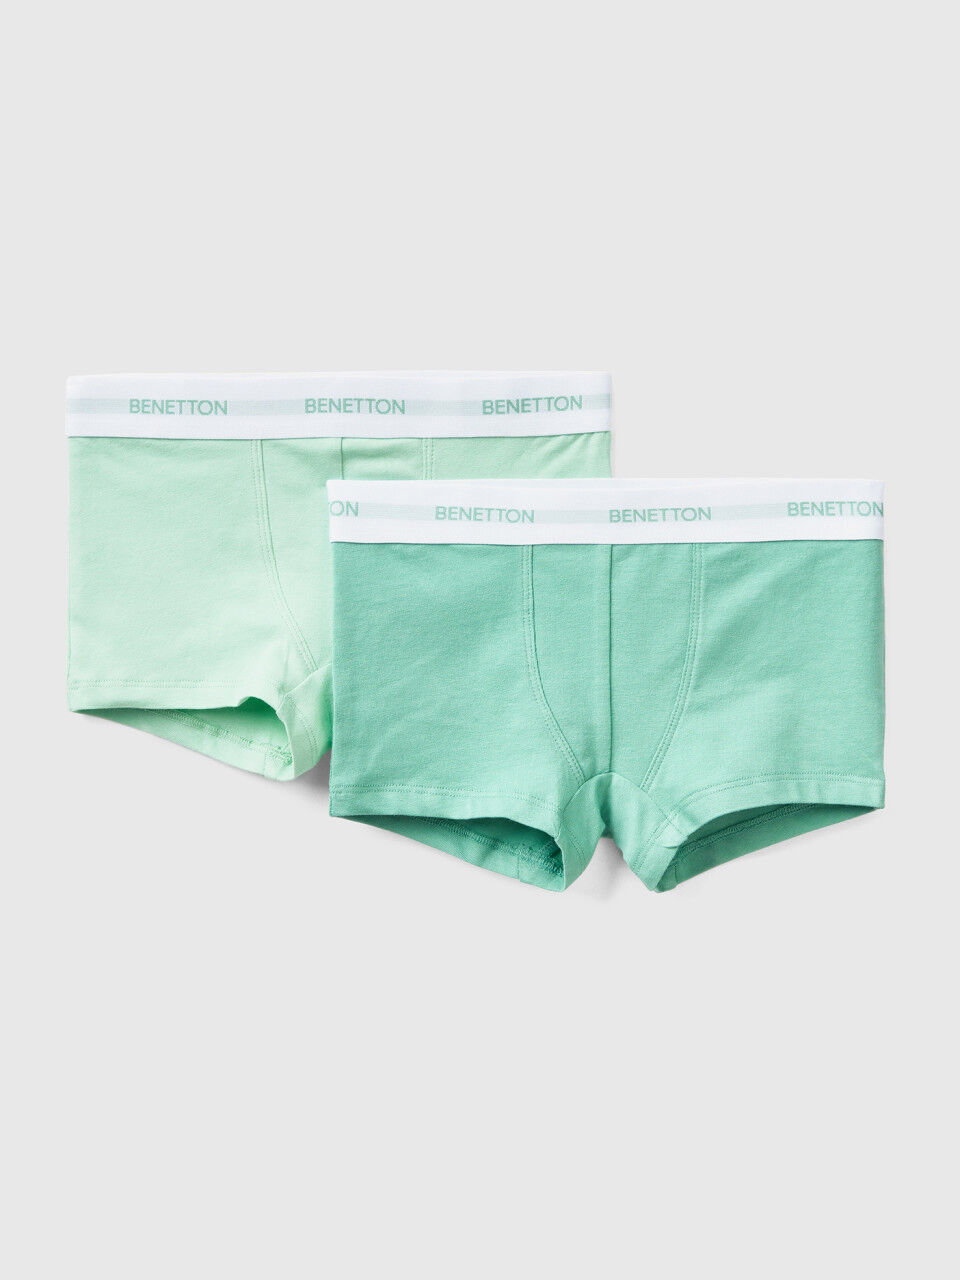 Two pairs of boxers with logoed elastic